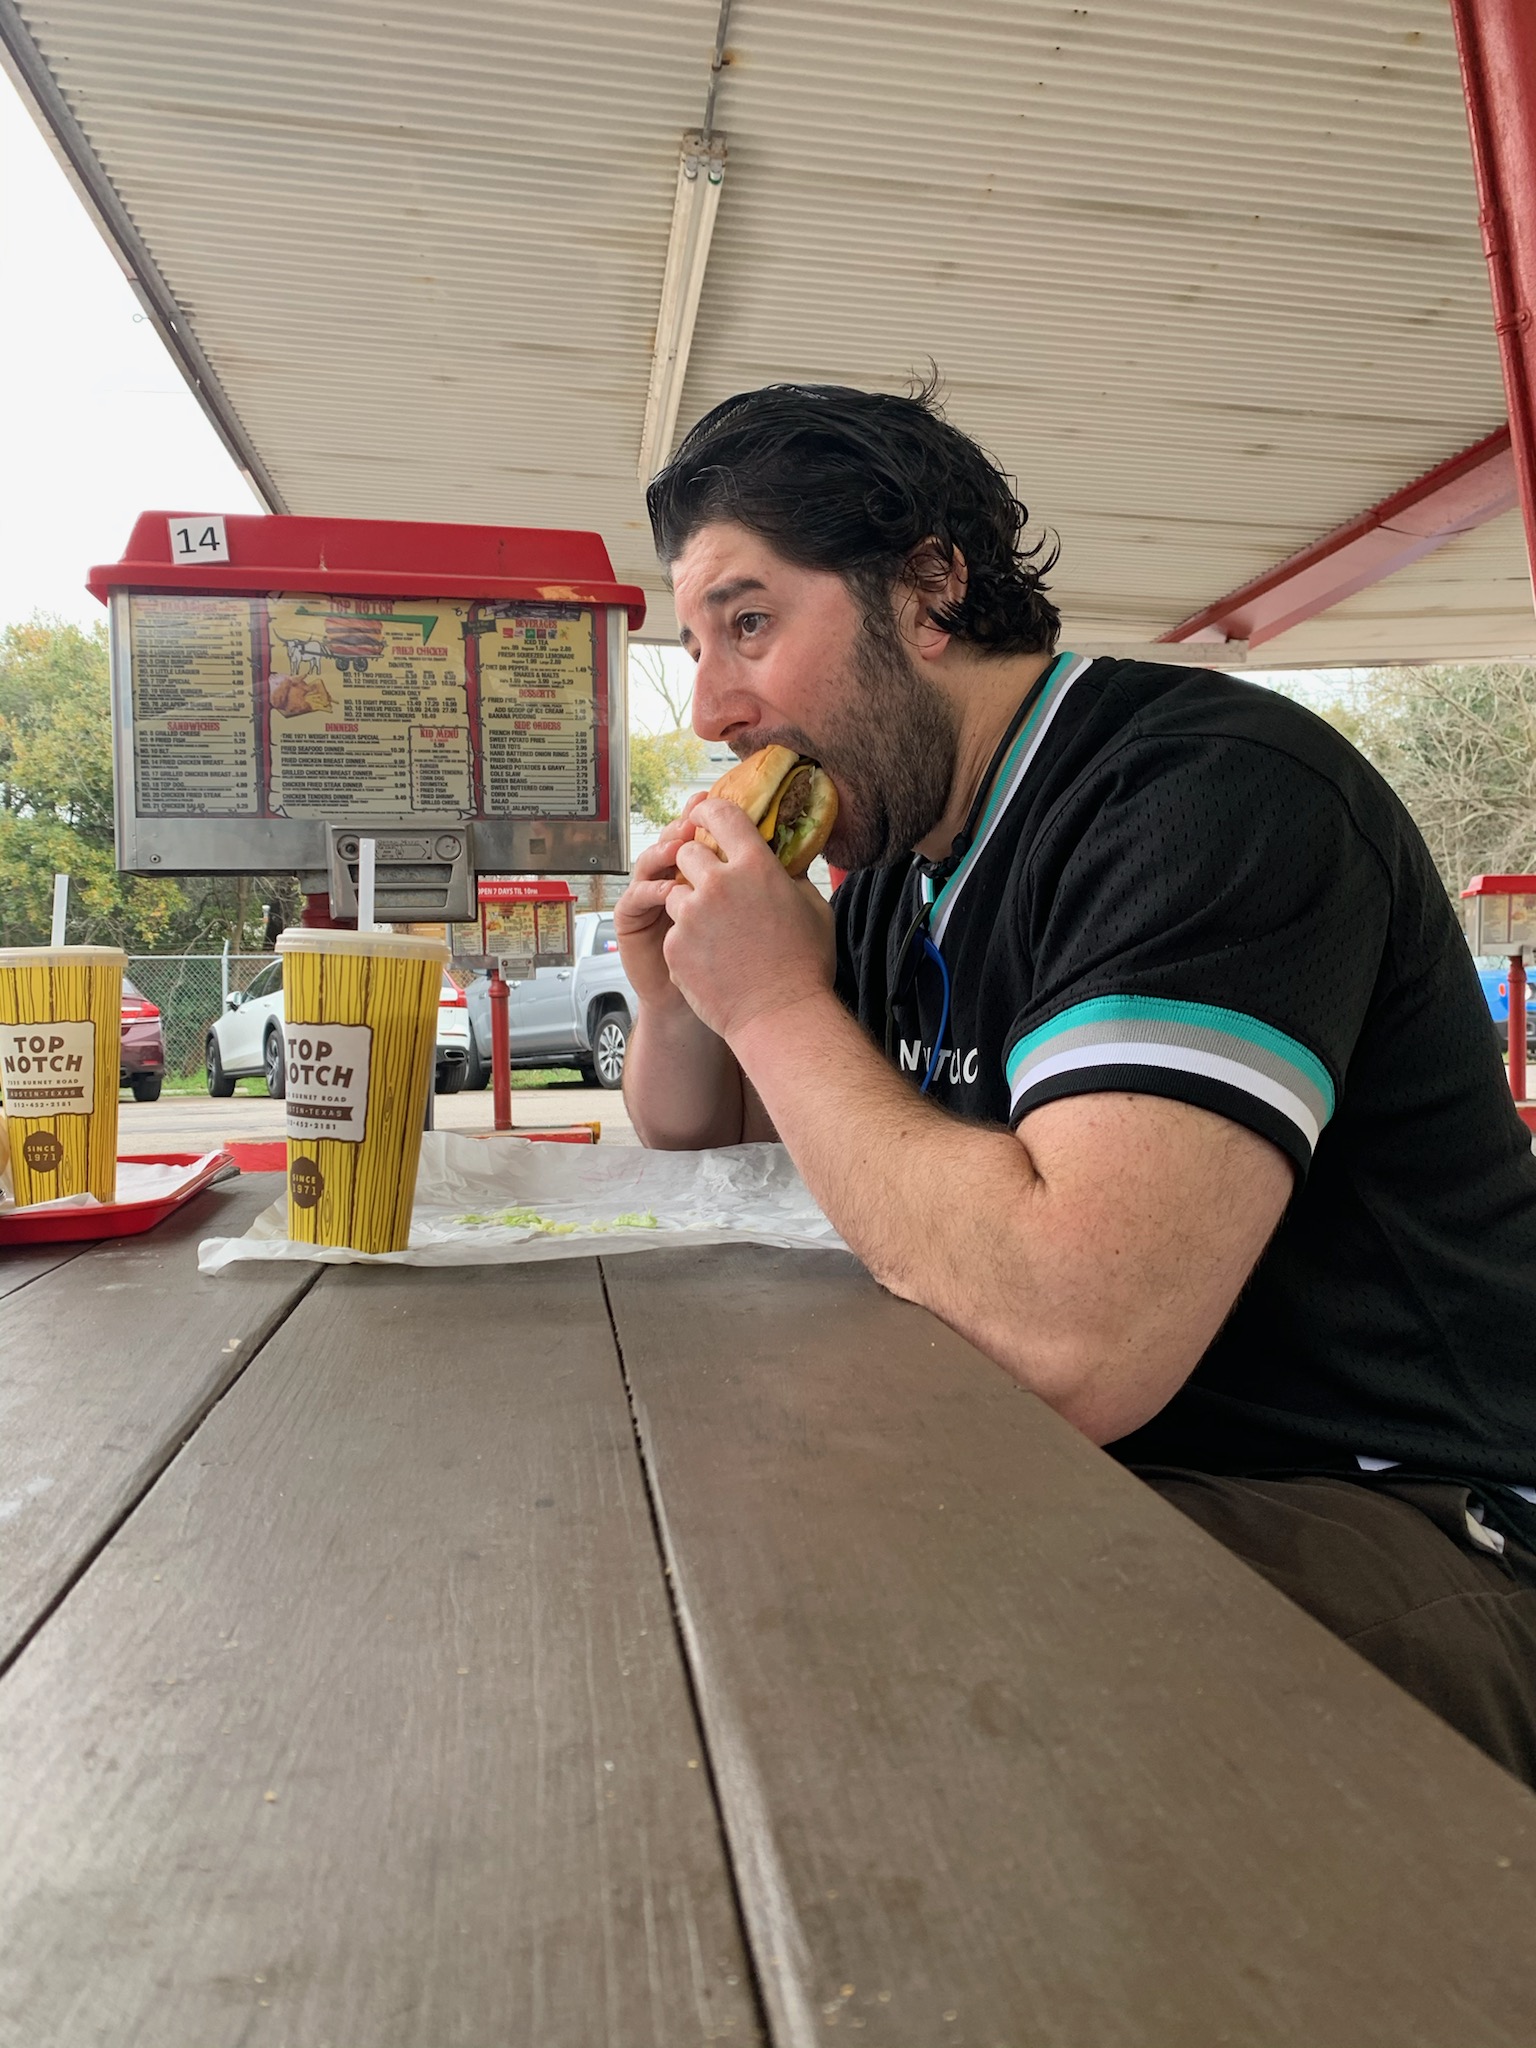 Lee eats a burger at Top Notch Burgers in Austin, TX ("Alright, Alright, Alright ...")  (Pre-Covid)